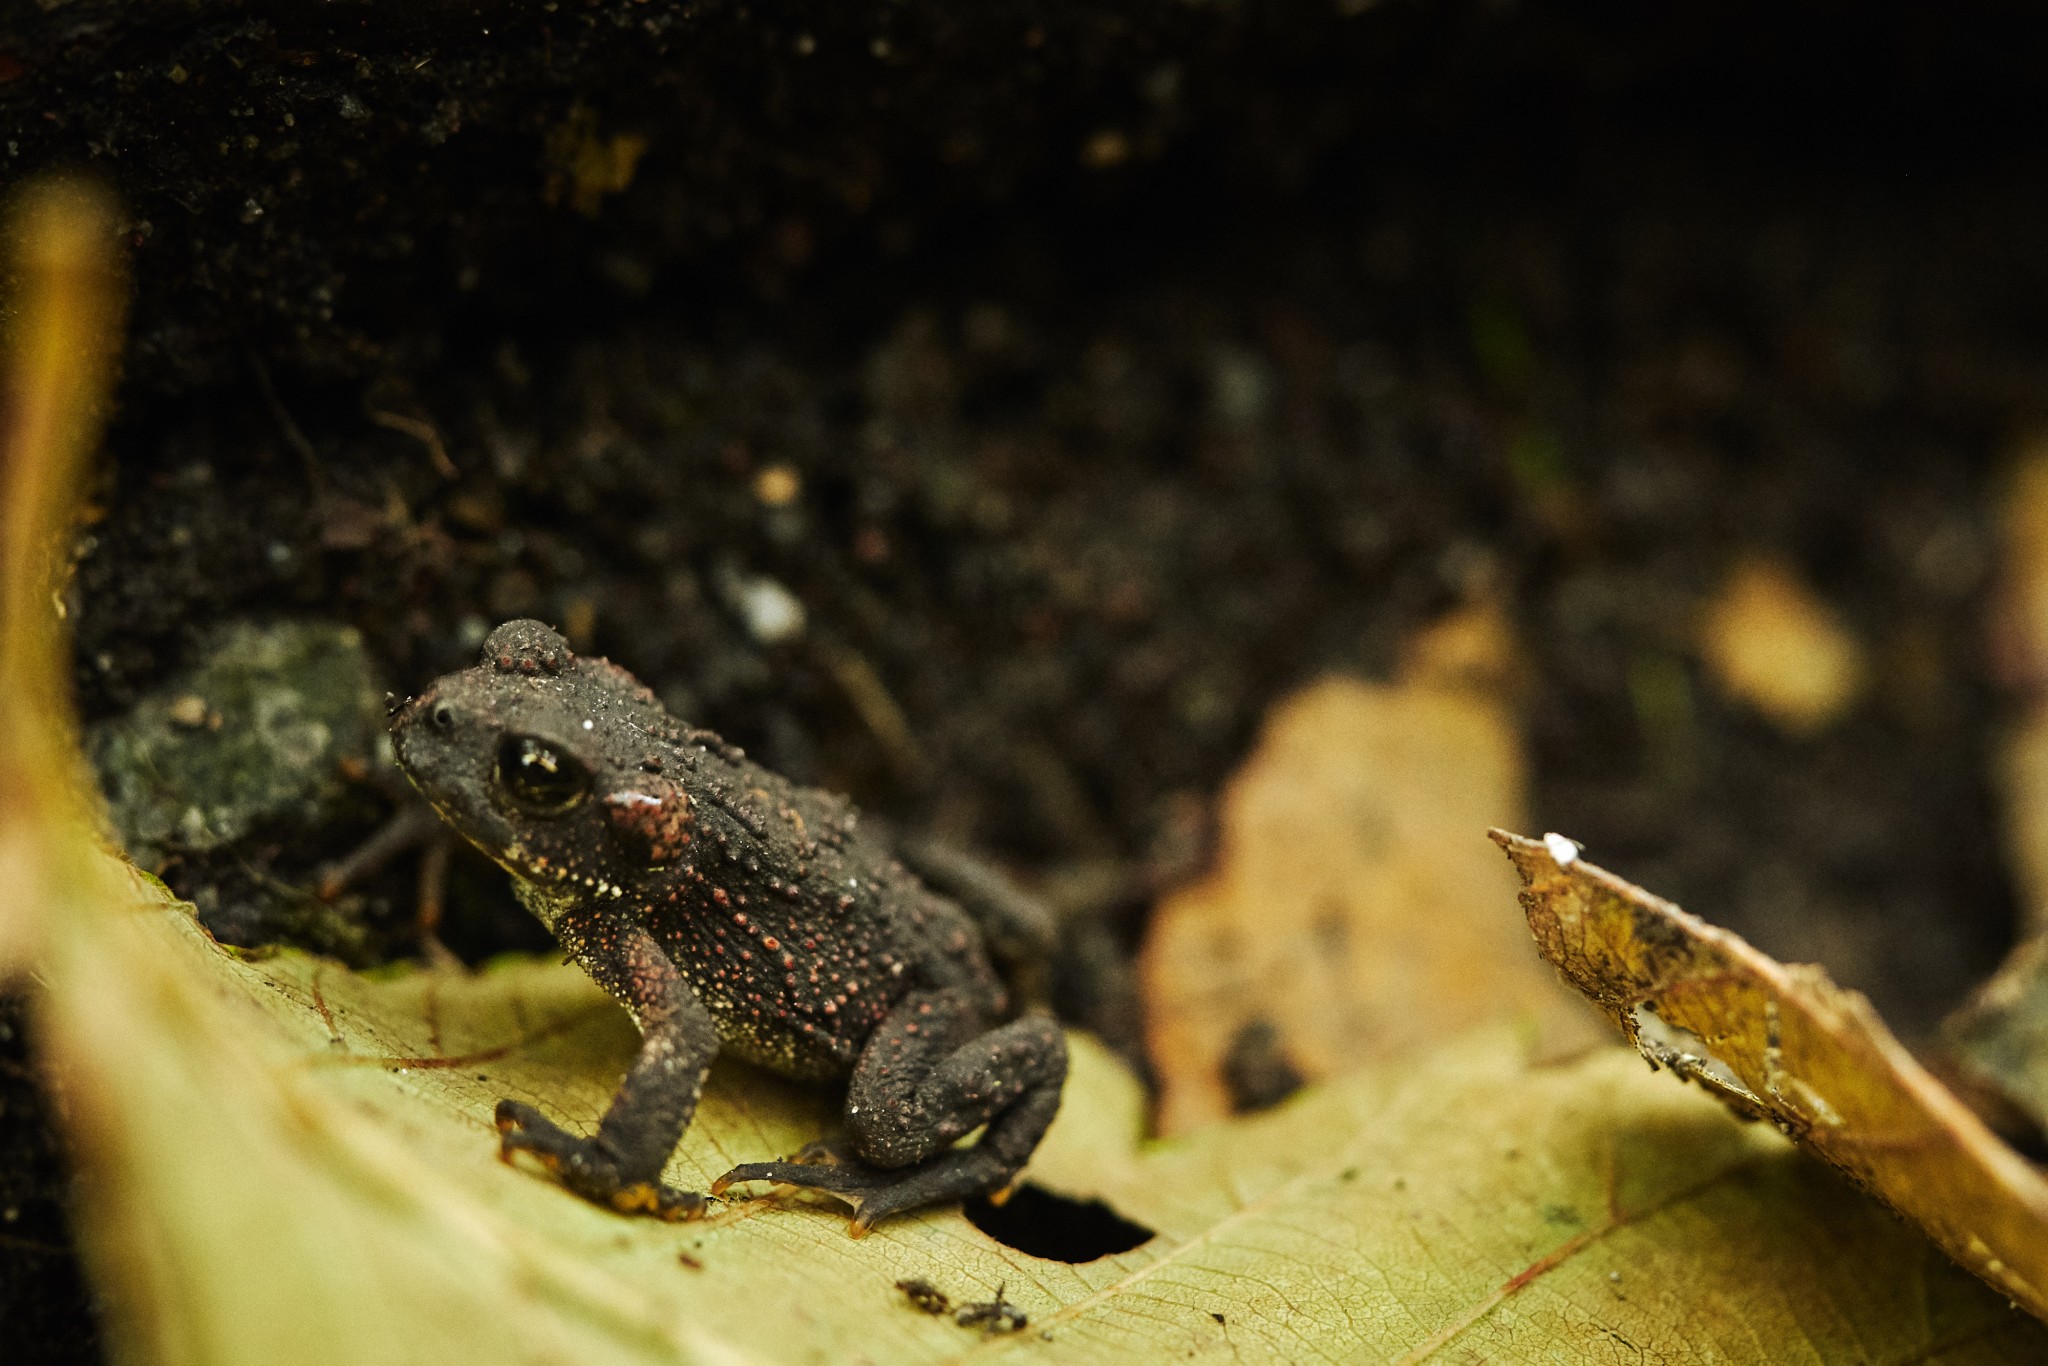 St-Helens-and-Hummocks-Trail---Toad-10.jpg